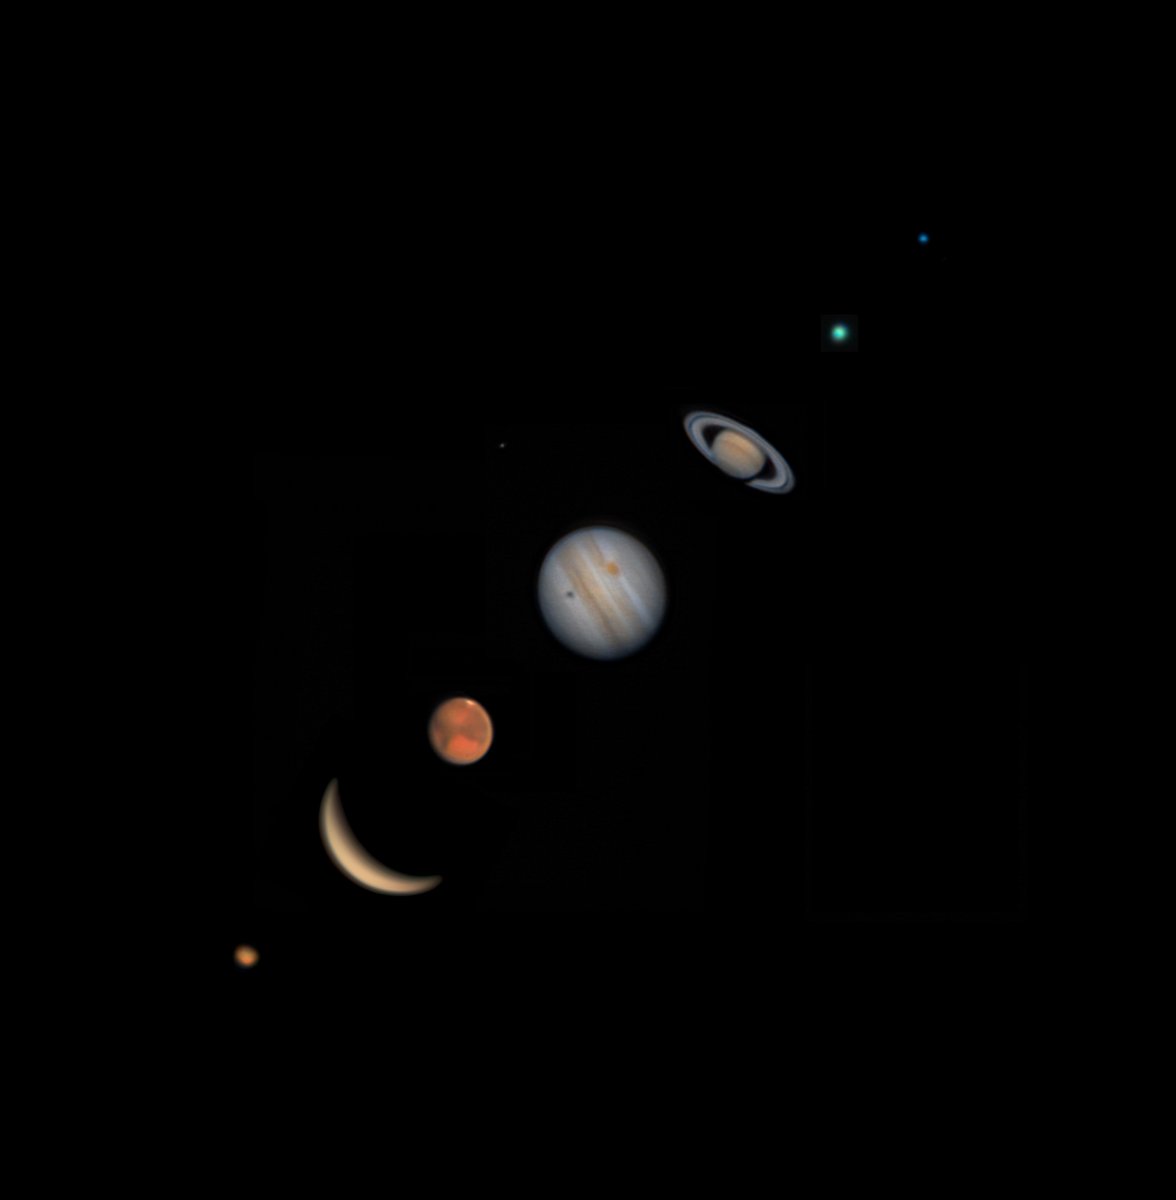 7 planets of the solar system with a DSLR and 8 Dob [by DueAd651] #astronomy #astrophotography #astronomyadventure #astronomylife #astronomy #astronomical #astronomyphotography #spaceexploration #spacefacts #SpaceScientist #spacescience #universefacts #astronomyfacts